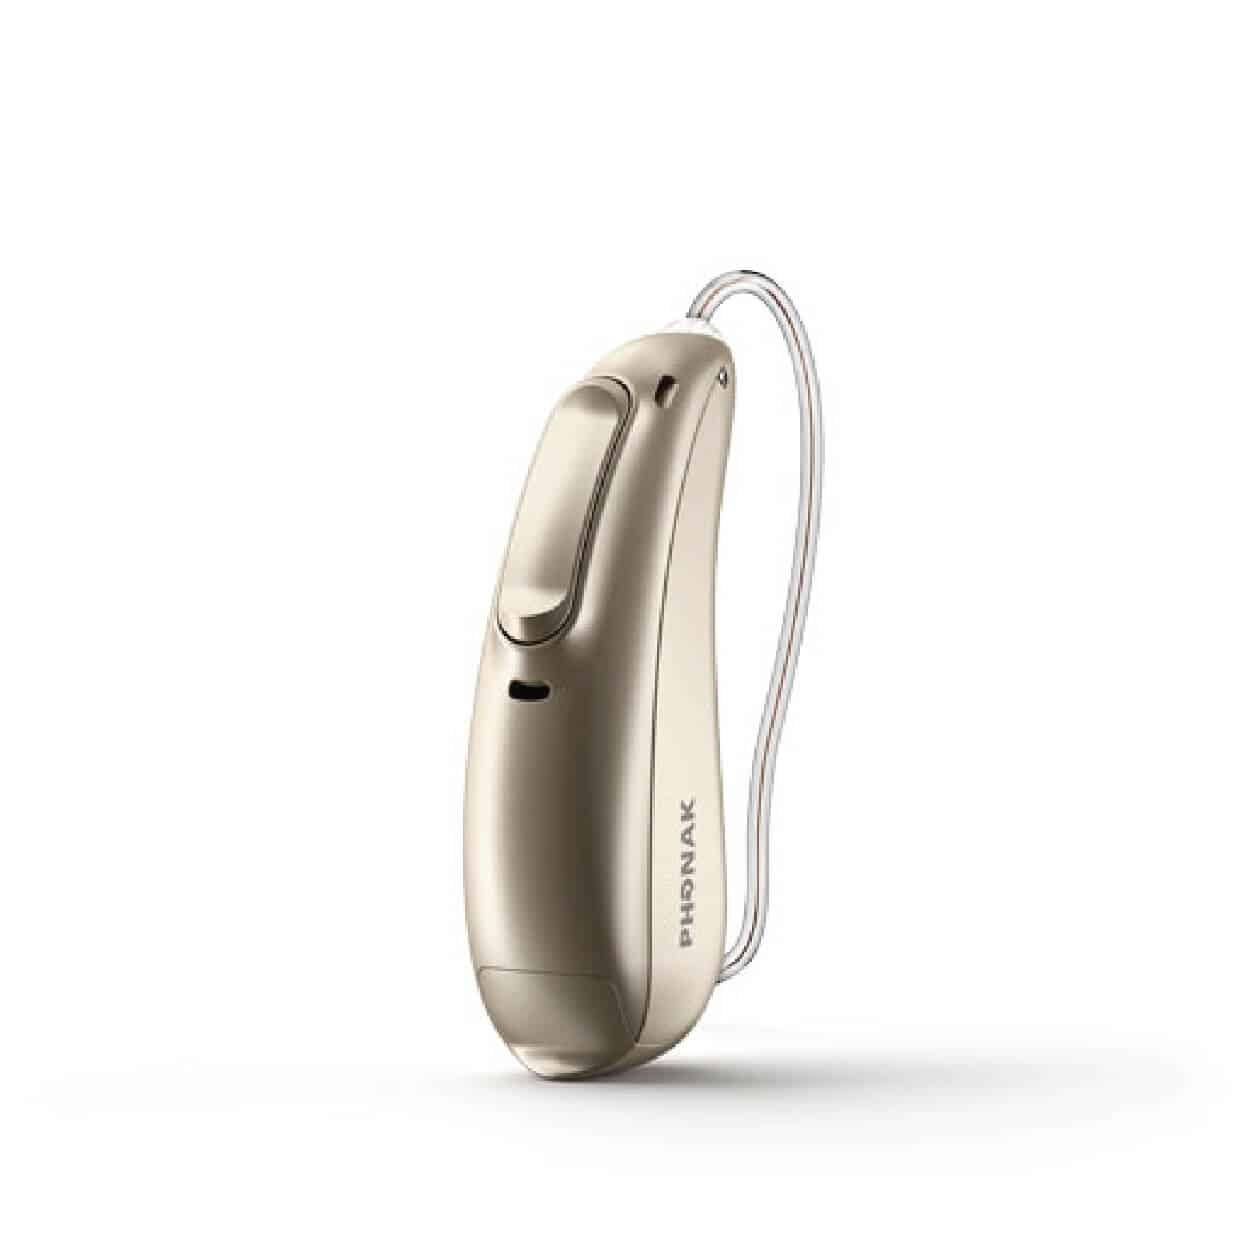 Hearing Aid Styles | Sample image of RIC hearing aid